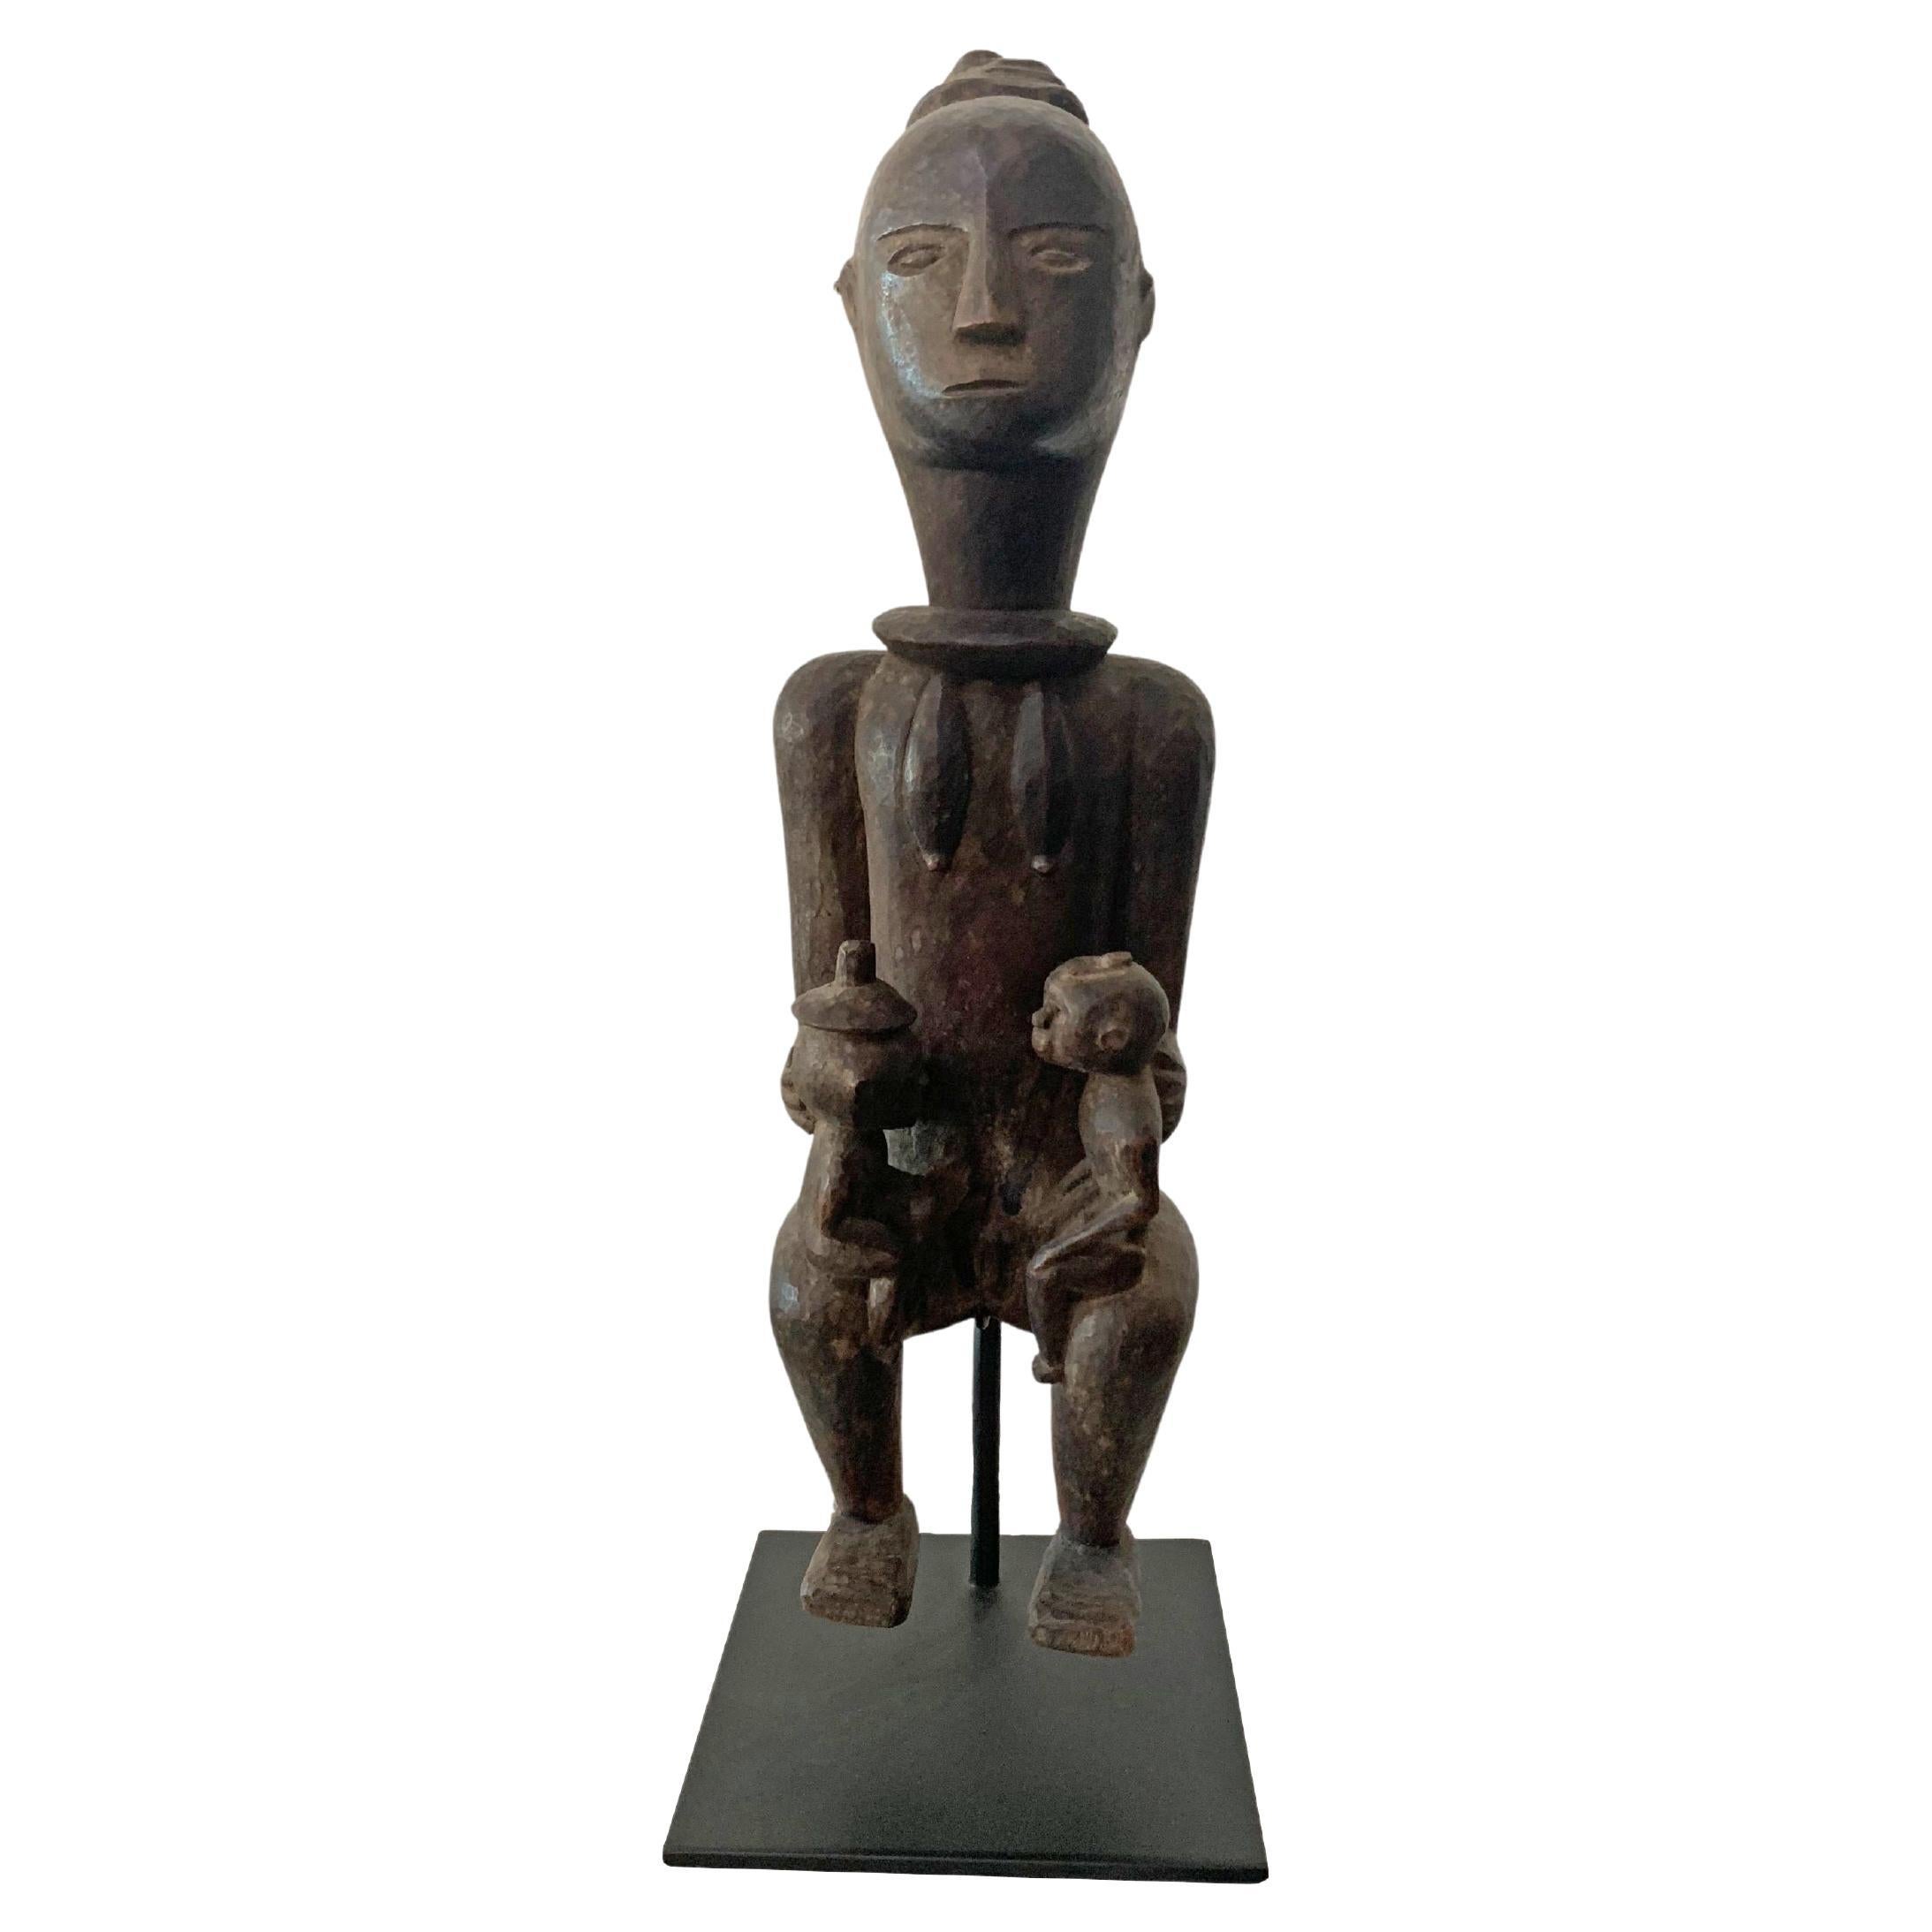 Wooden Tribal Sculpture / Carving of Fertility Figure, Sumba Island, Indonesia